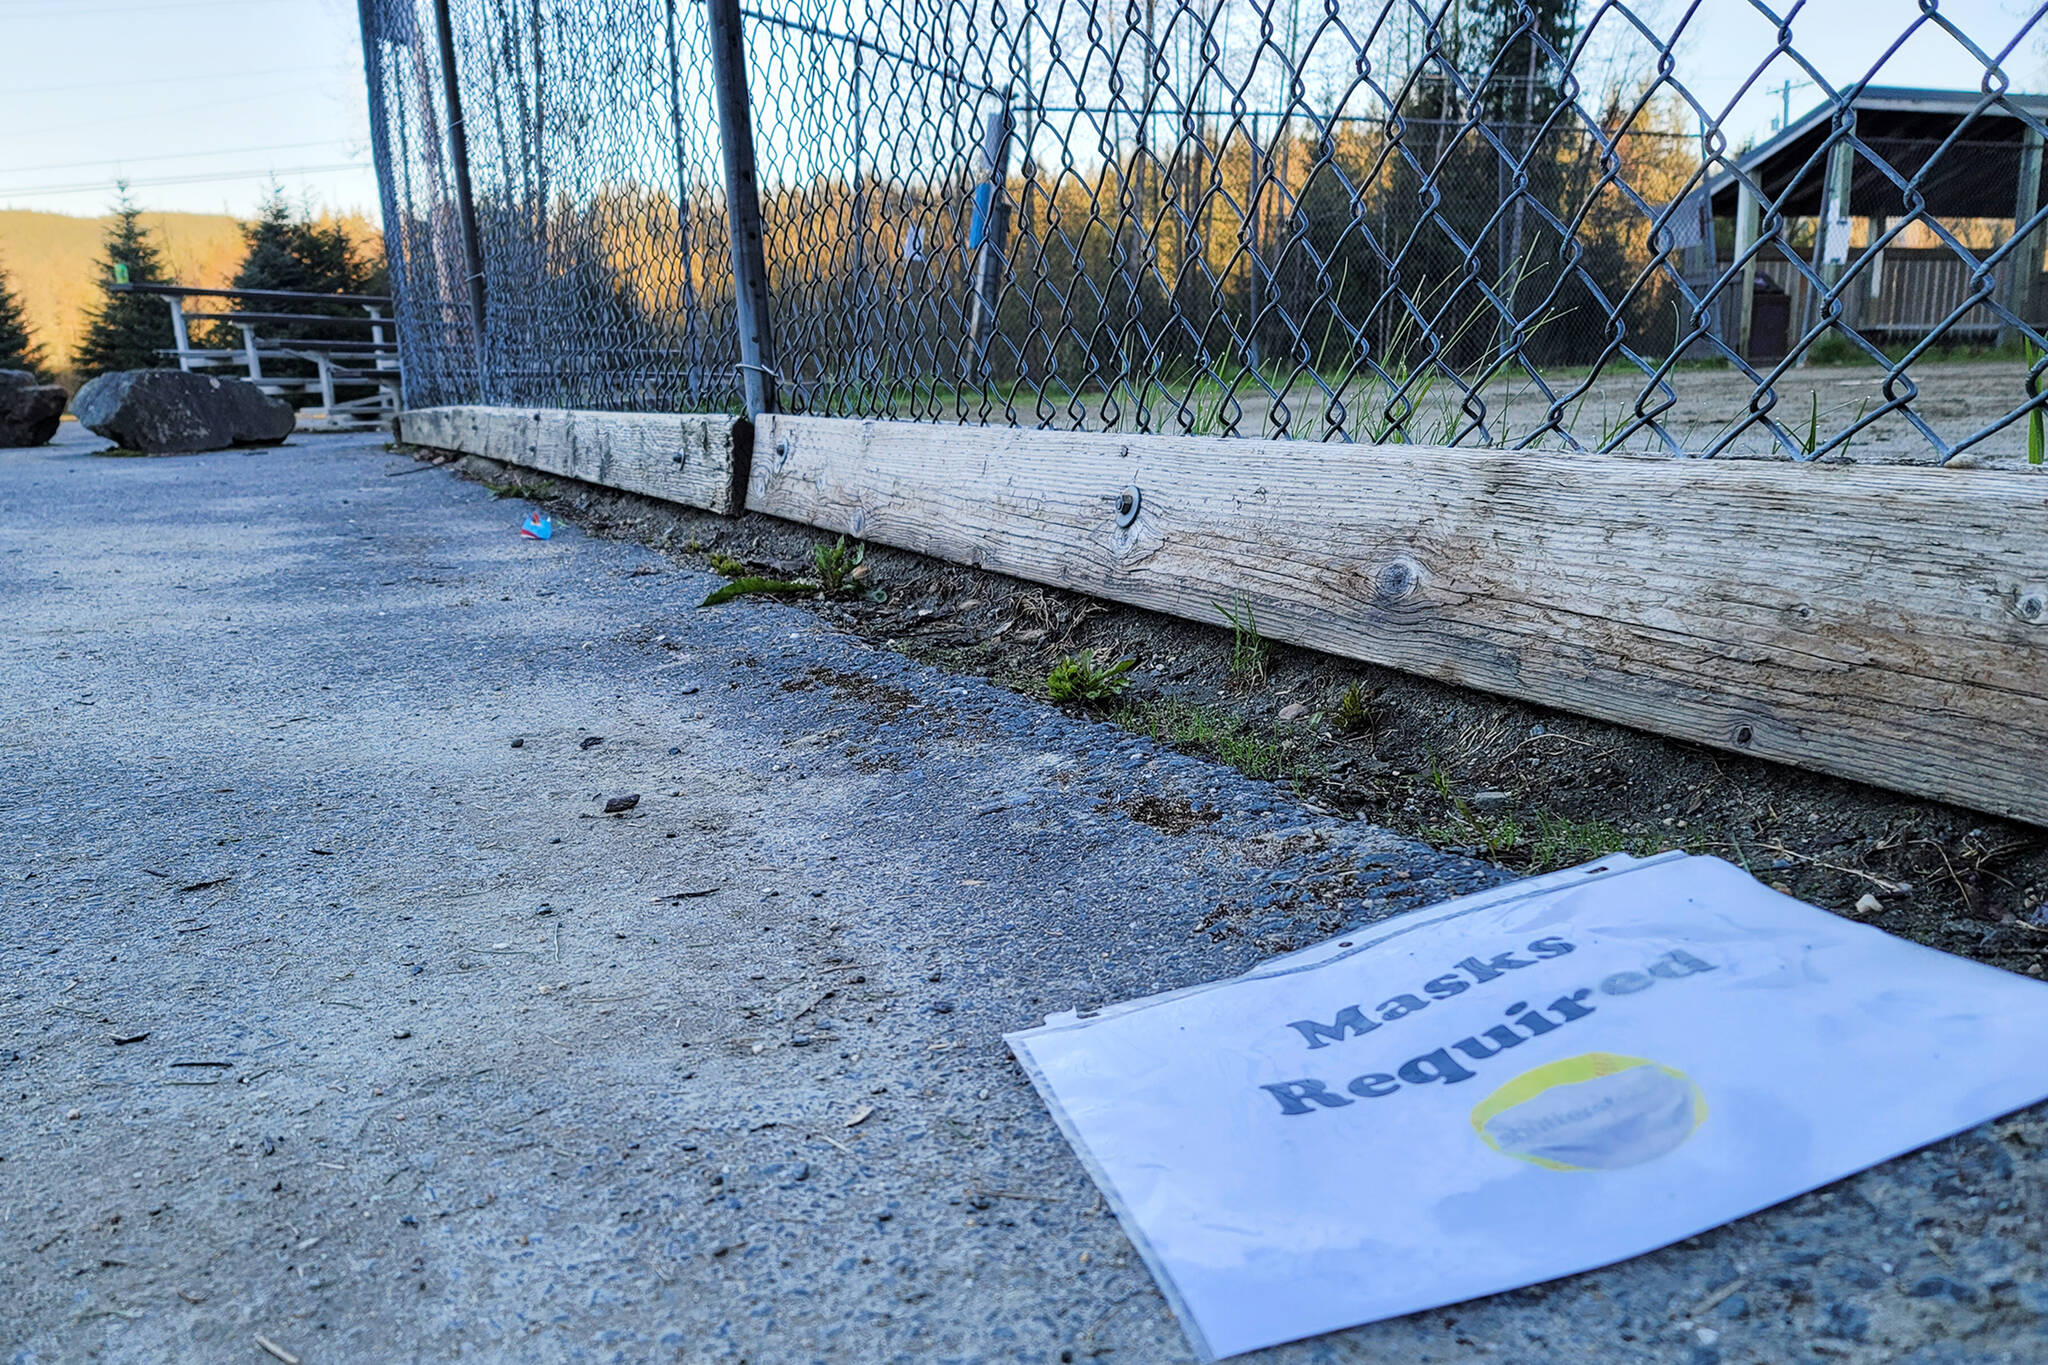 A sign reading “Masks Required” lies on the ground near a softball field at Melvin Park in this May photo. The City and Borough of Juneau is lowering the community risk level for COVID-19, but masks remain required inside public spaces. (Ben Hohenstatt / Juneau Empire)<strong></strong>